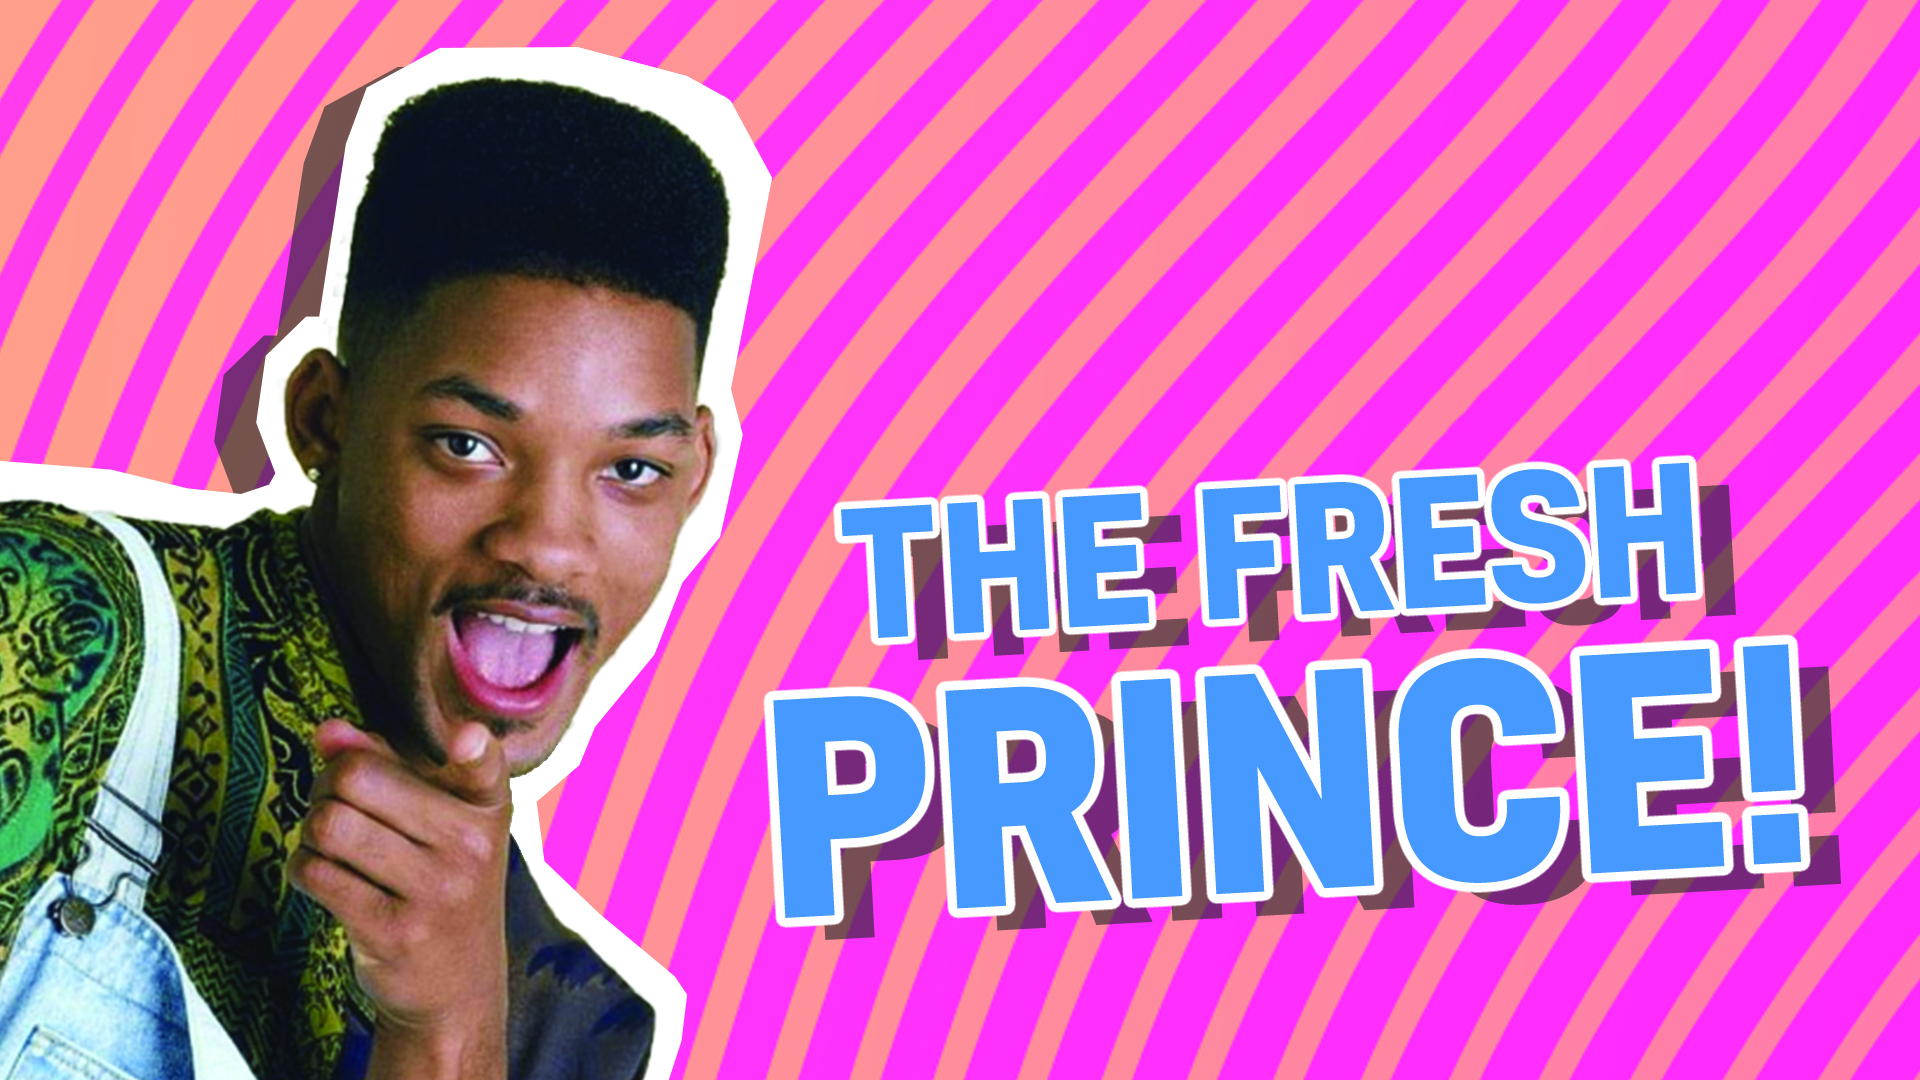 Will Smith as The Fresh Prince of Bel-Air